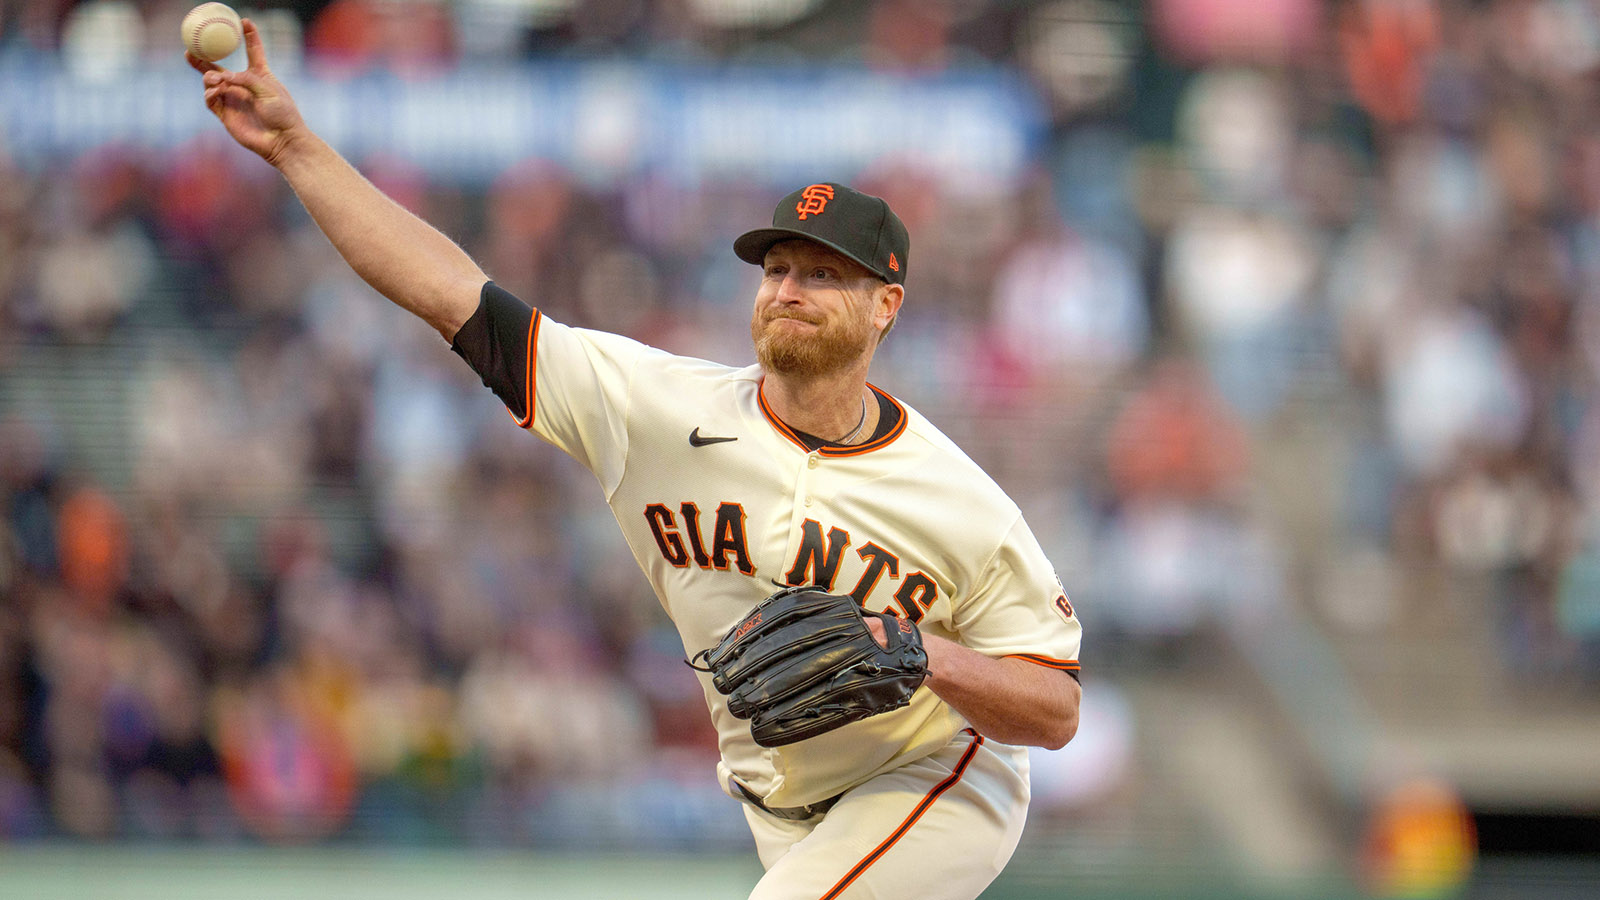 Giants observations: Alex Cobb roughed up in ugly loss to Rangers